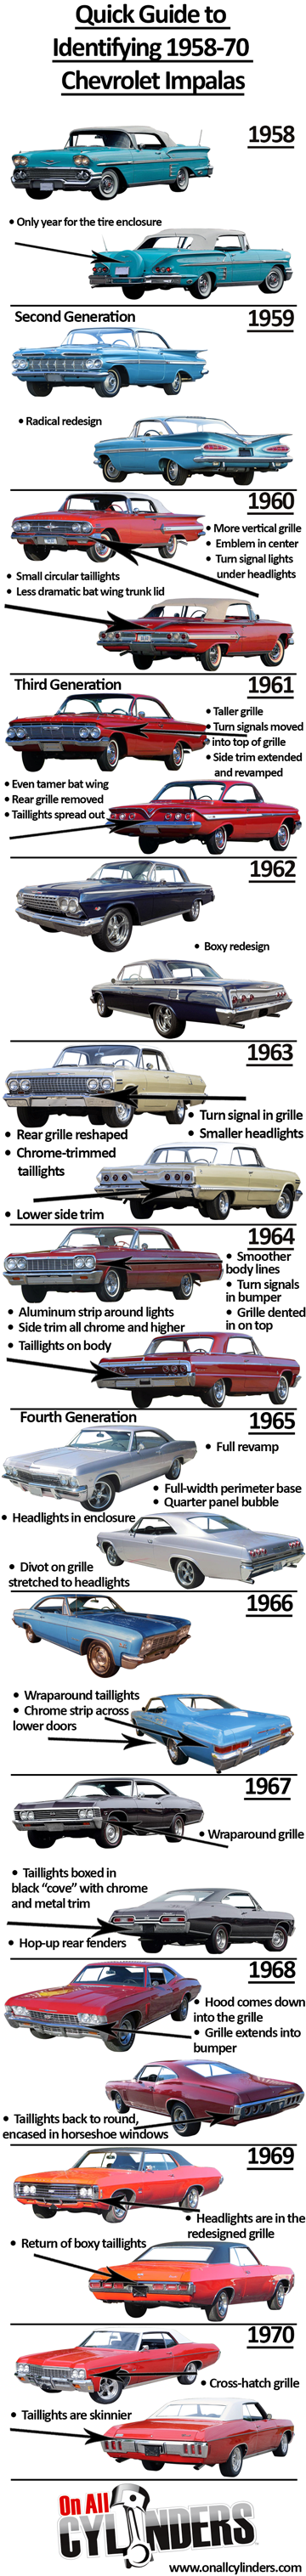 Vehicle Identification Chart for Chevy Impalas 1958-1970